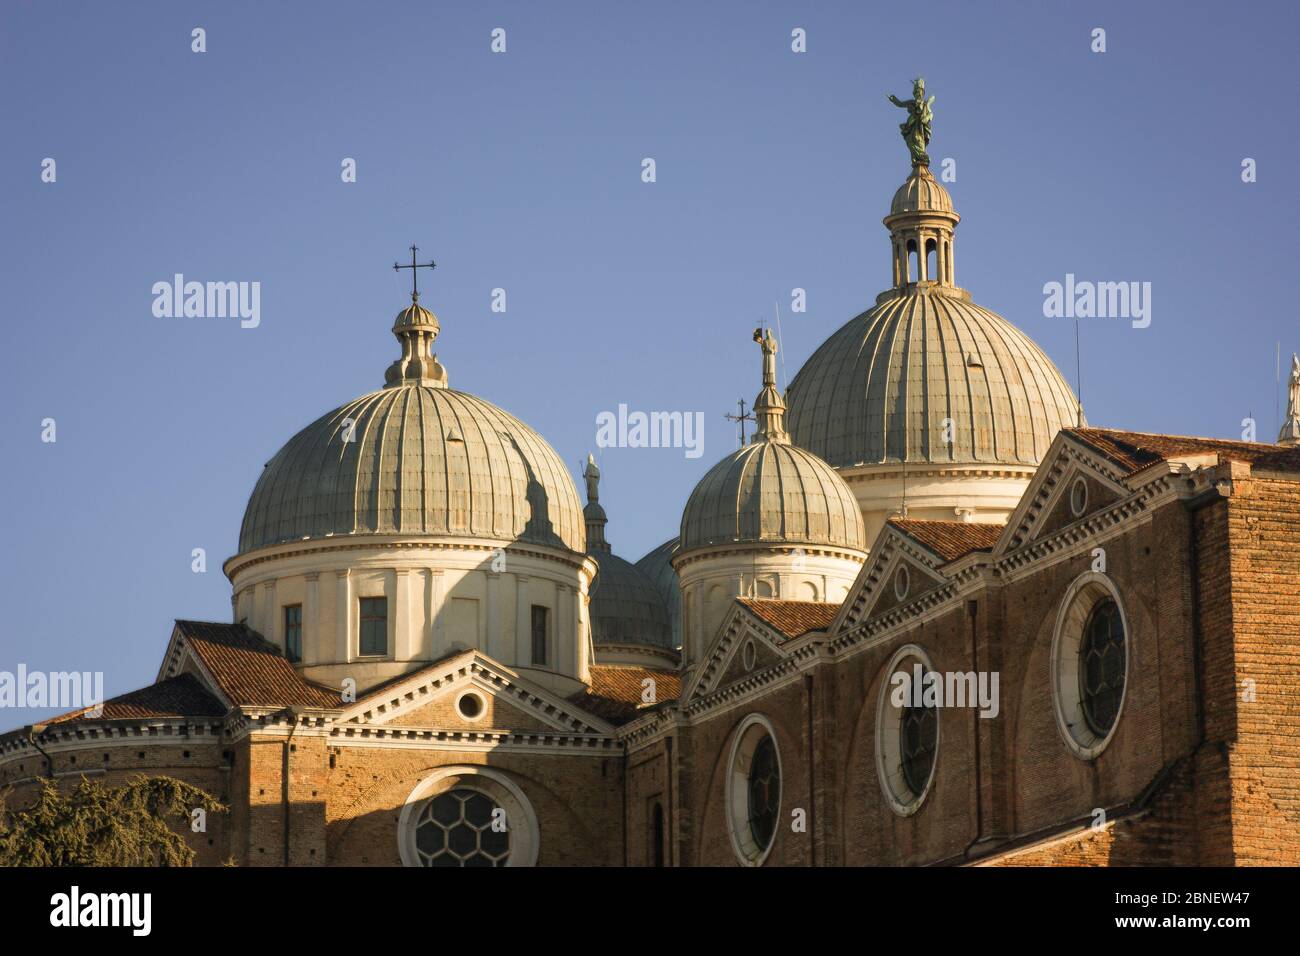 Domes of an old catholic church in Italy Stock Photo